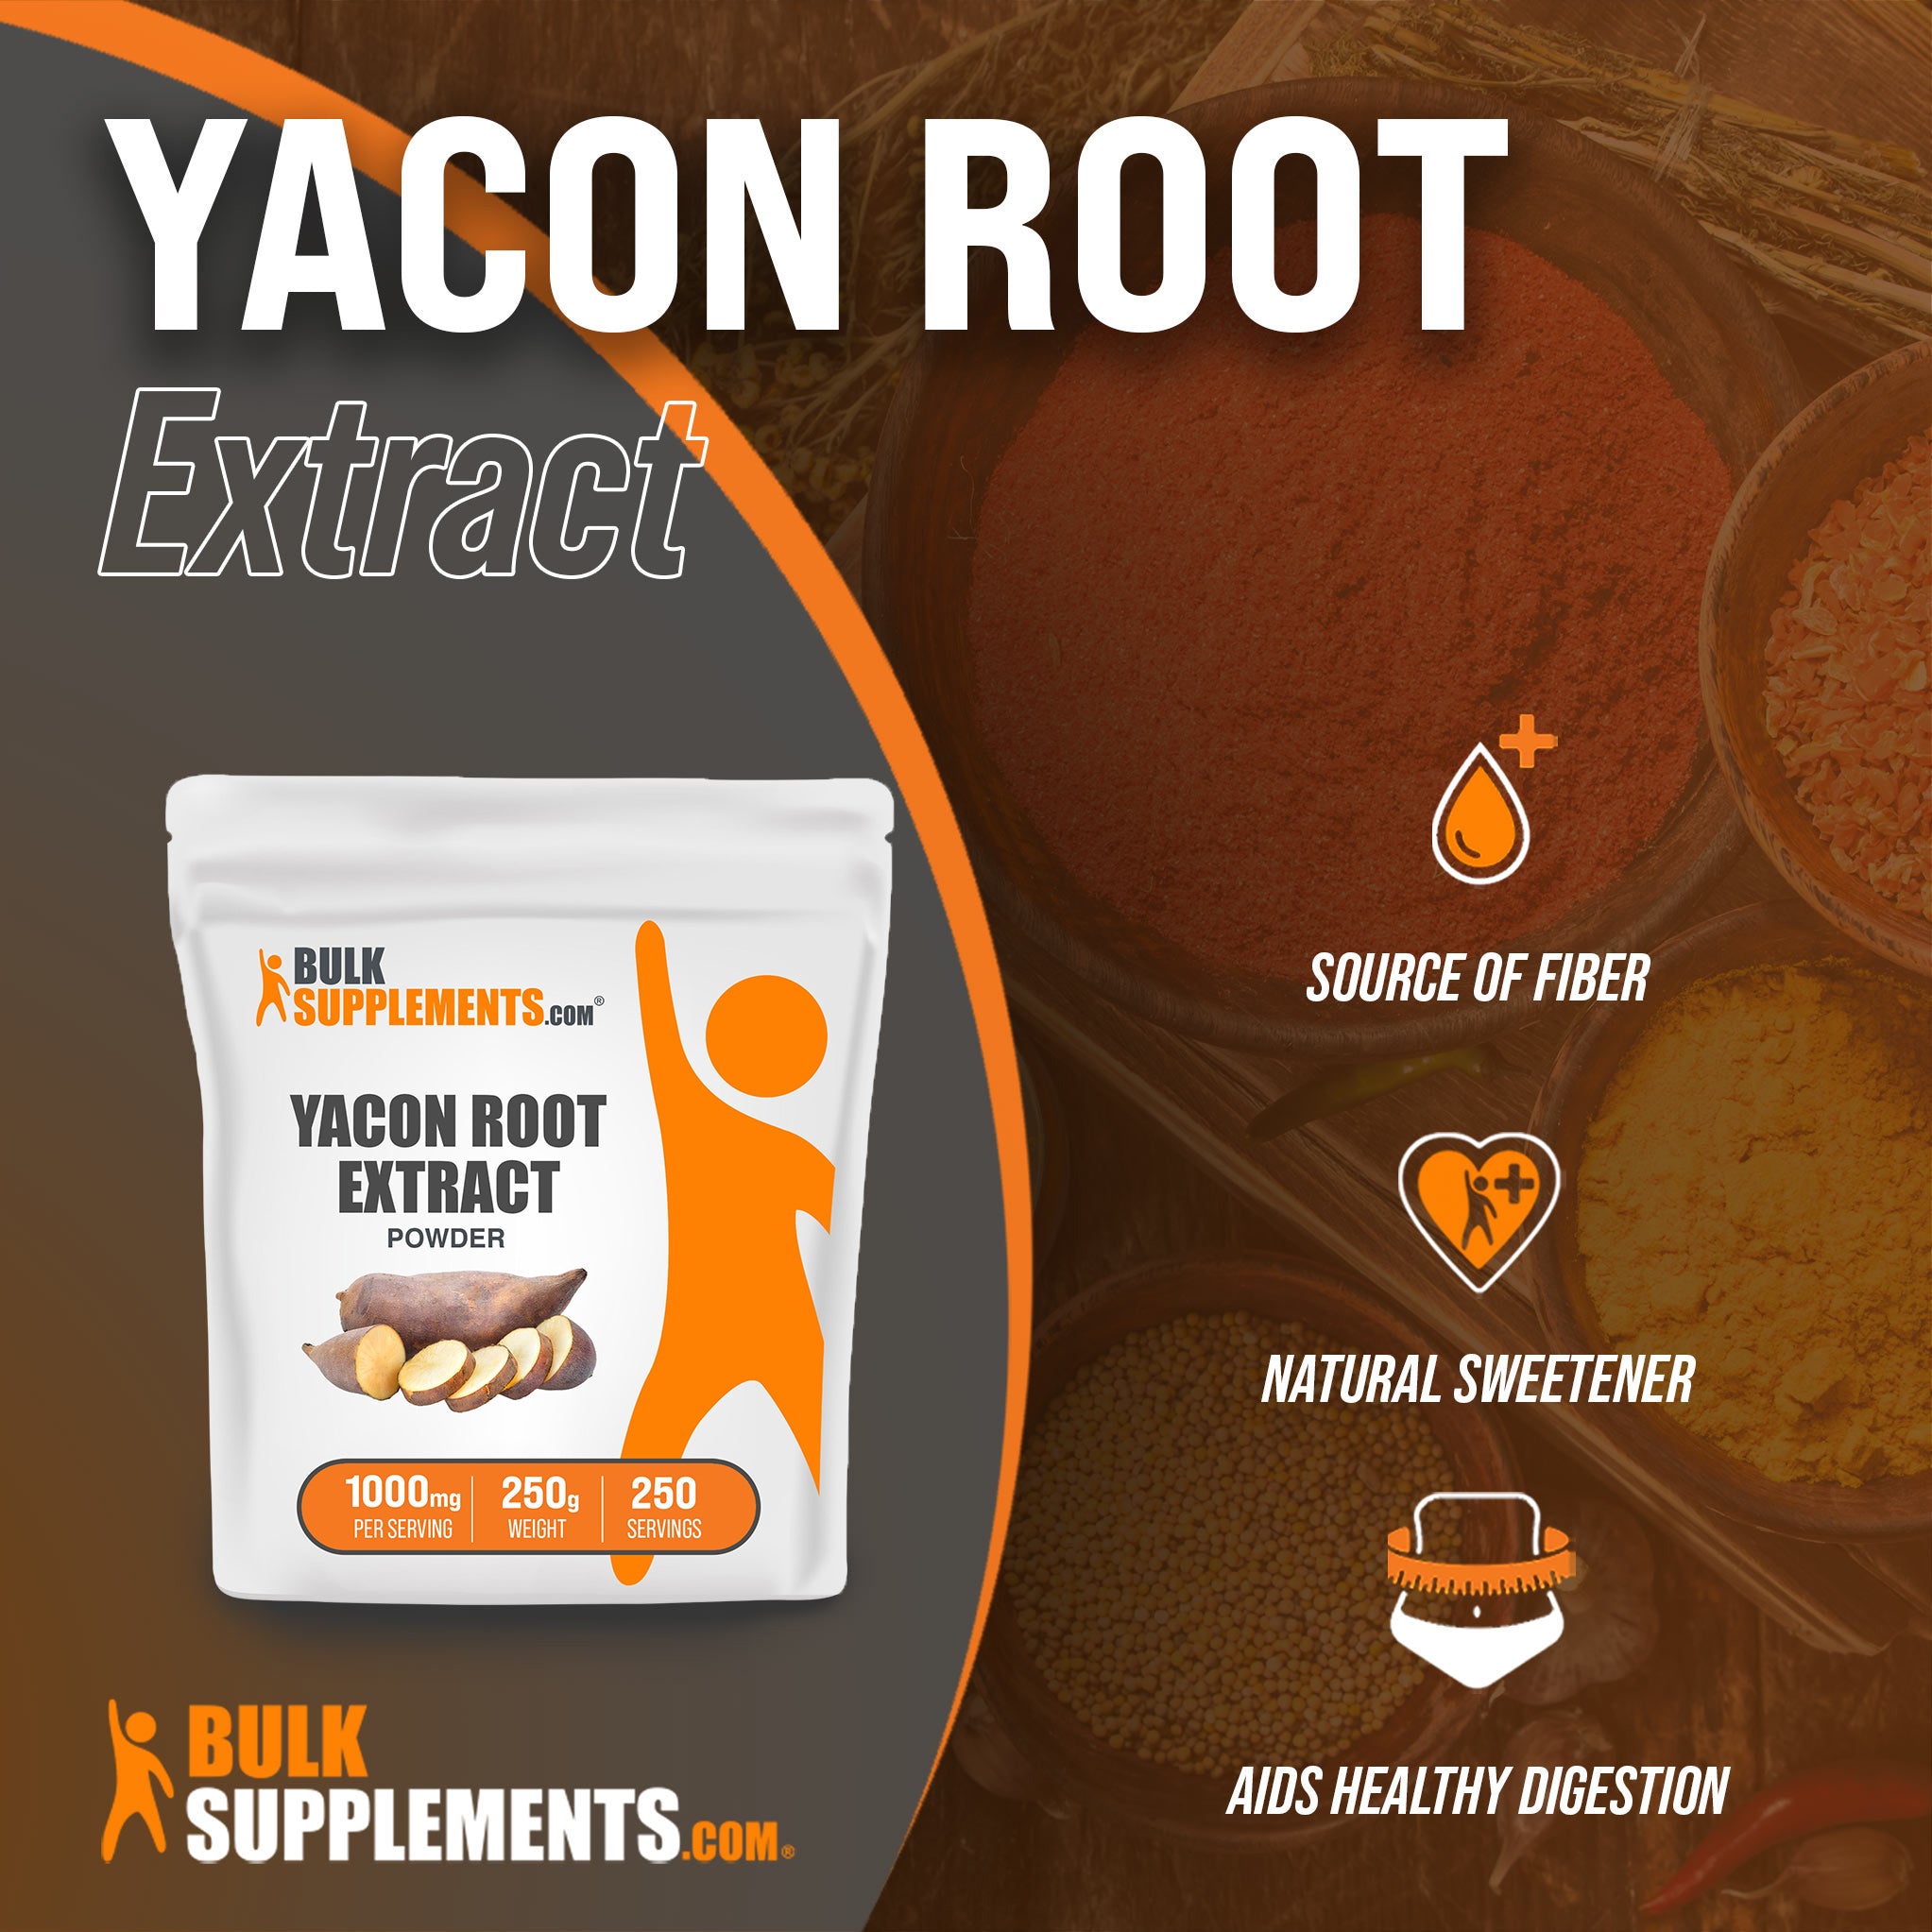 Benefits of Yacon Root Extract: source of fiber, natural sweetener, aids healthy digestion